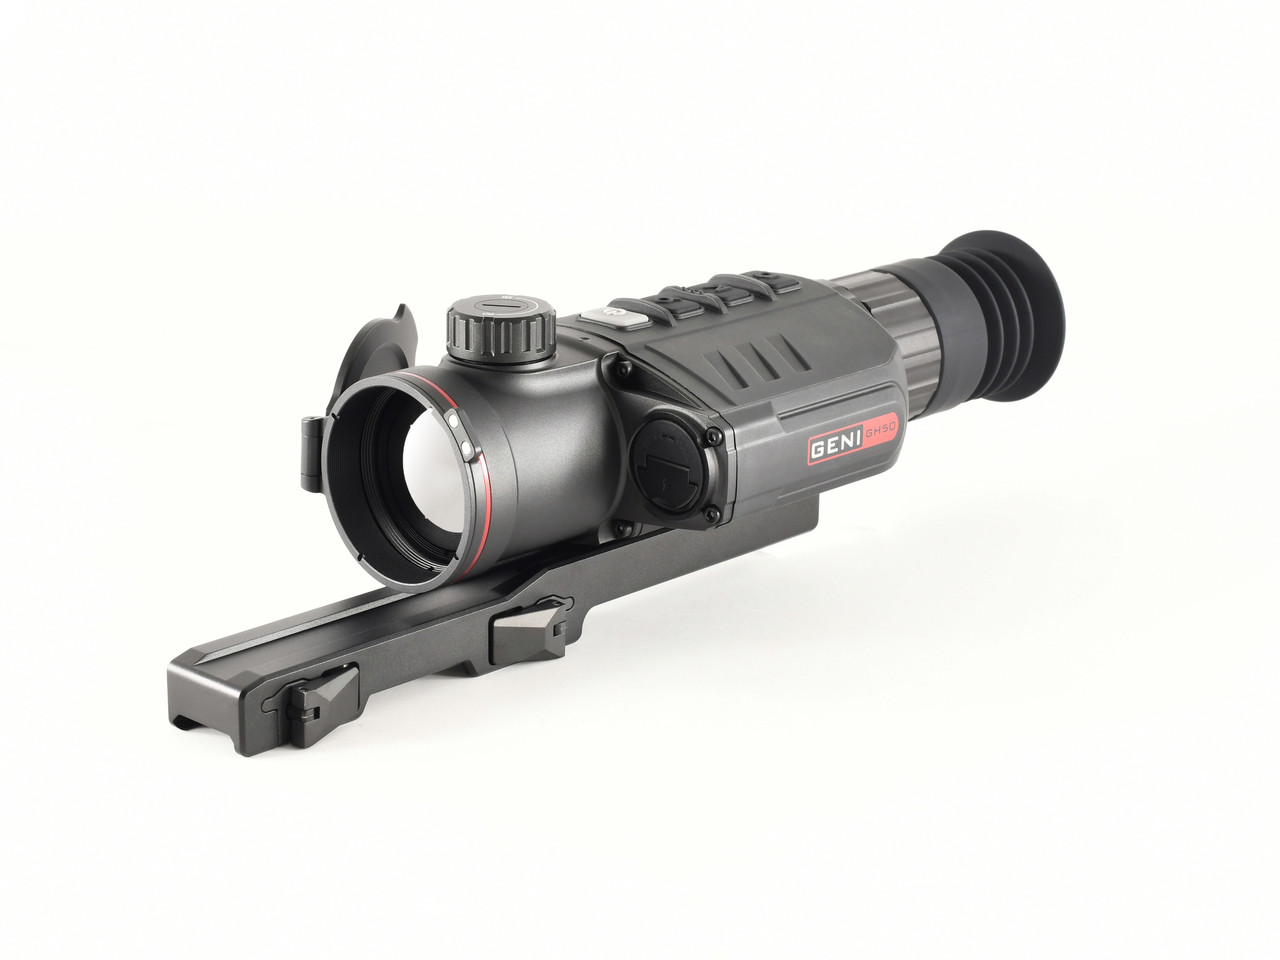 RICO G 640 3X 50mm Thermal Weapon Sight